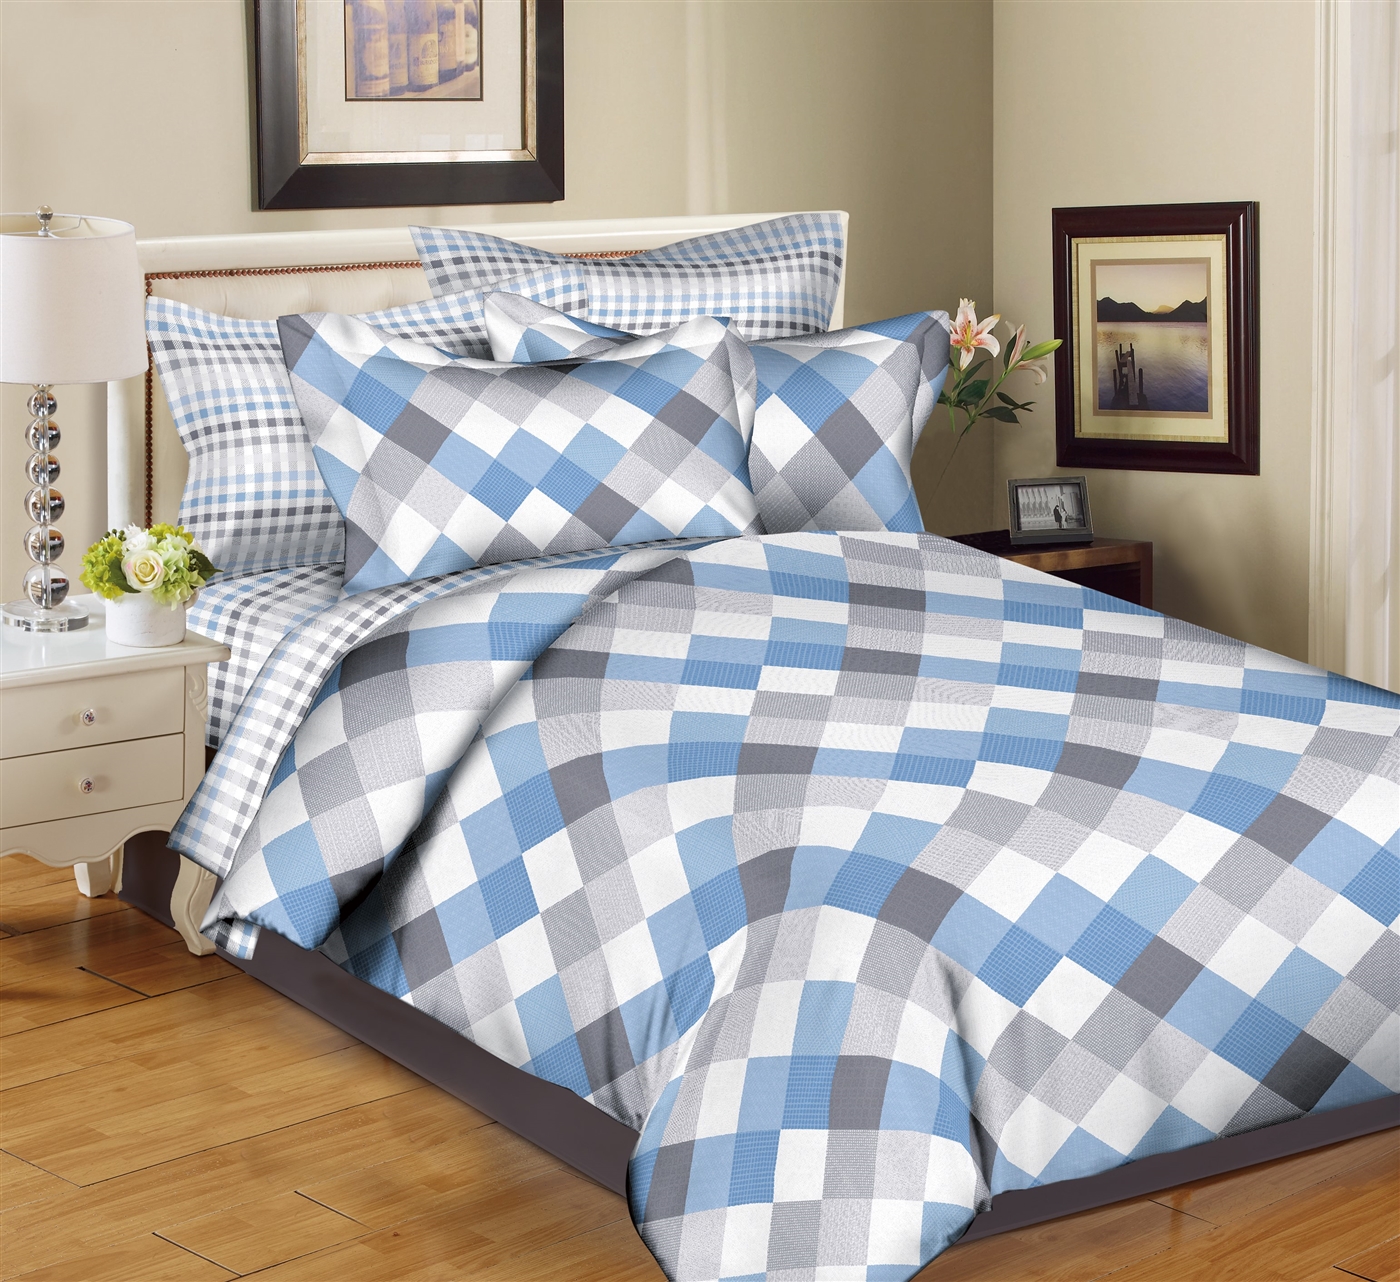 Better Bed Collection: Diamond Mix & Match Blue 8PC Bedding Sets - 200 Thread Count